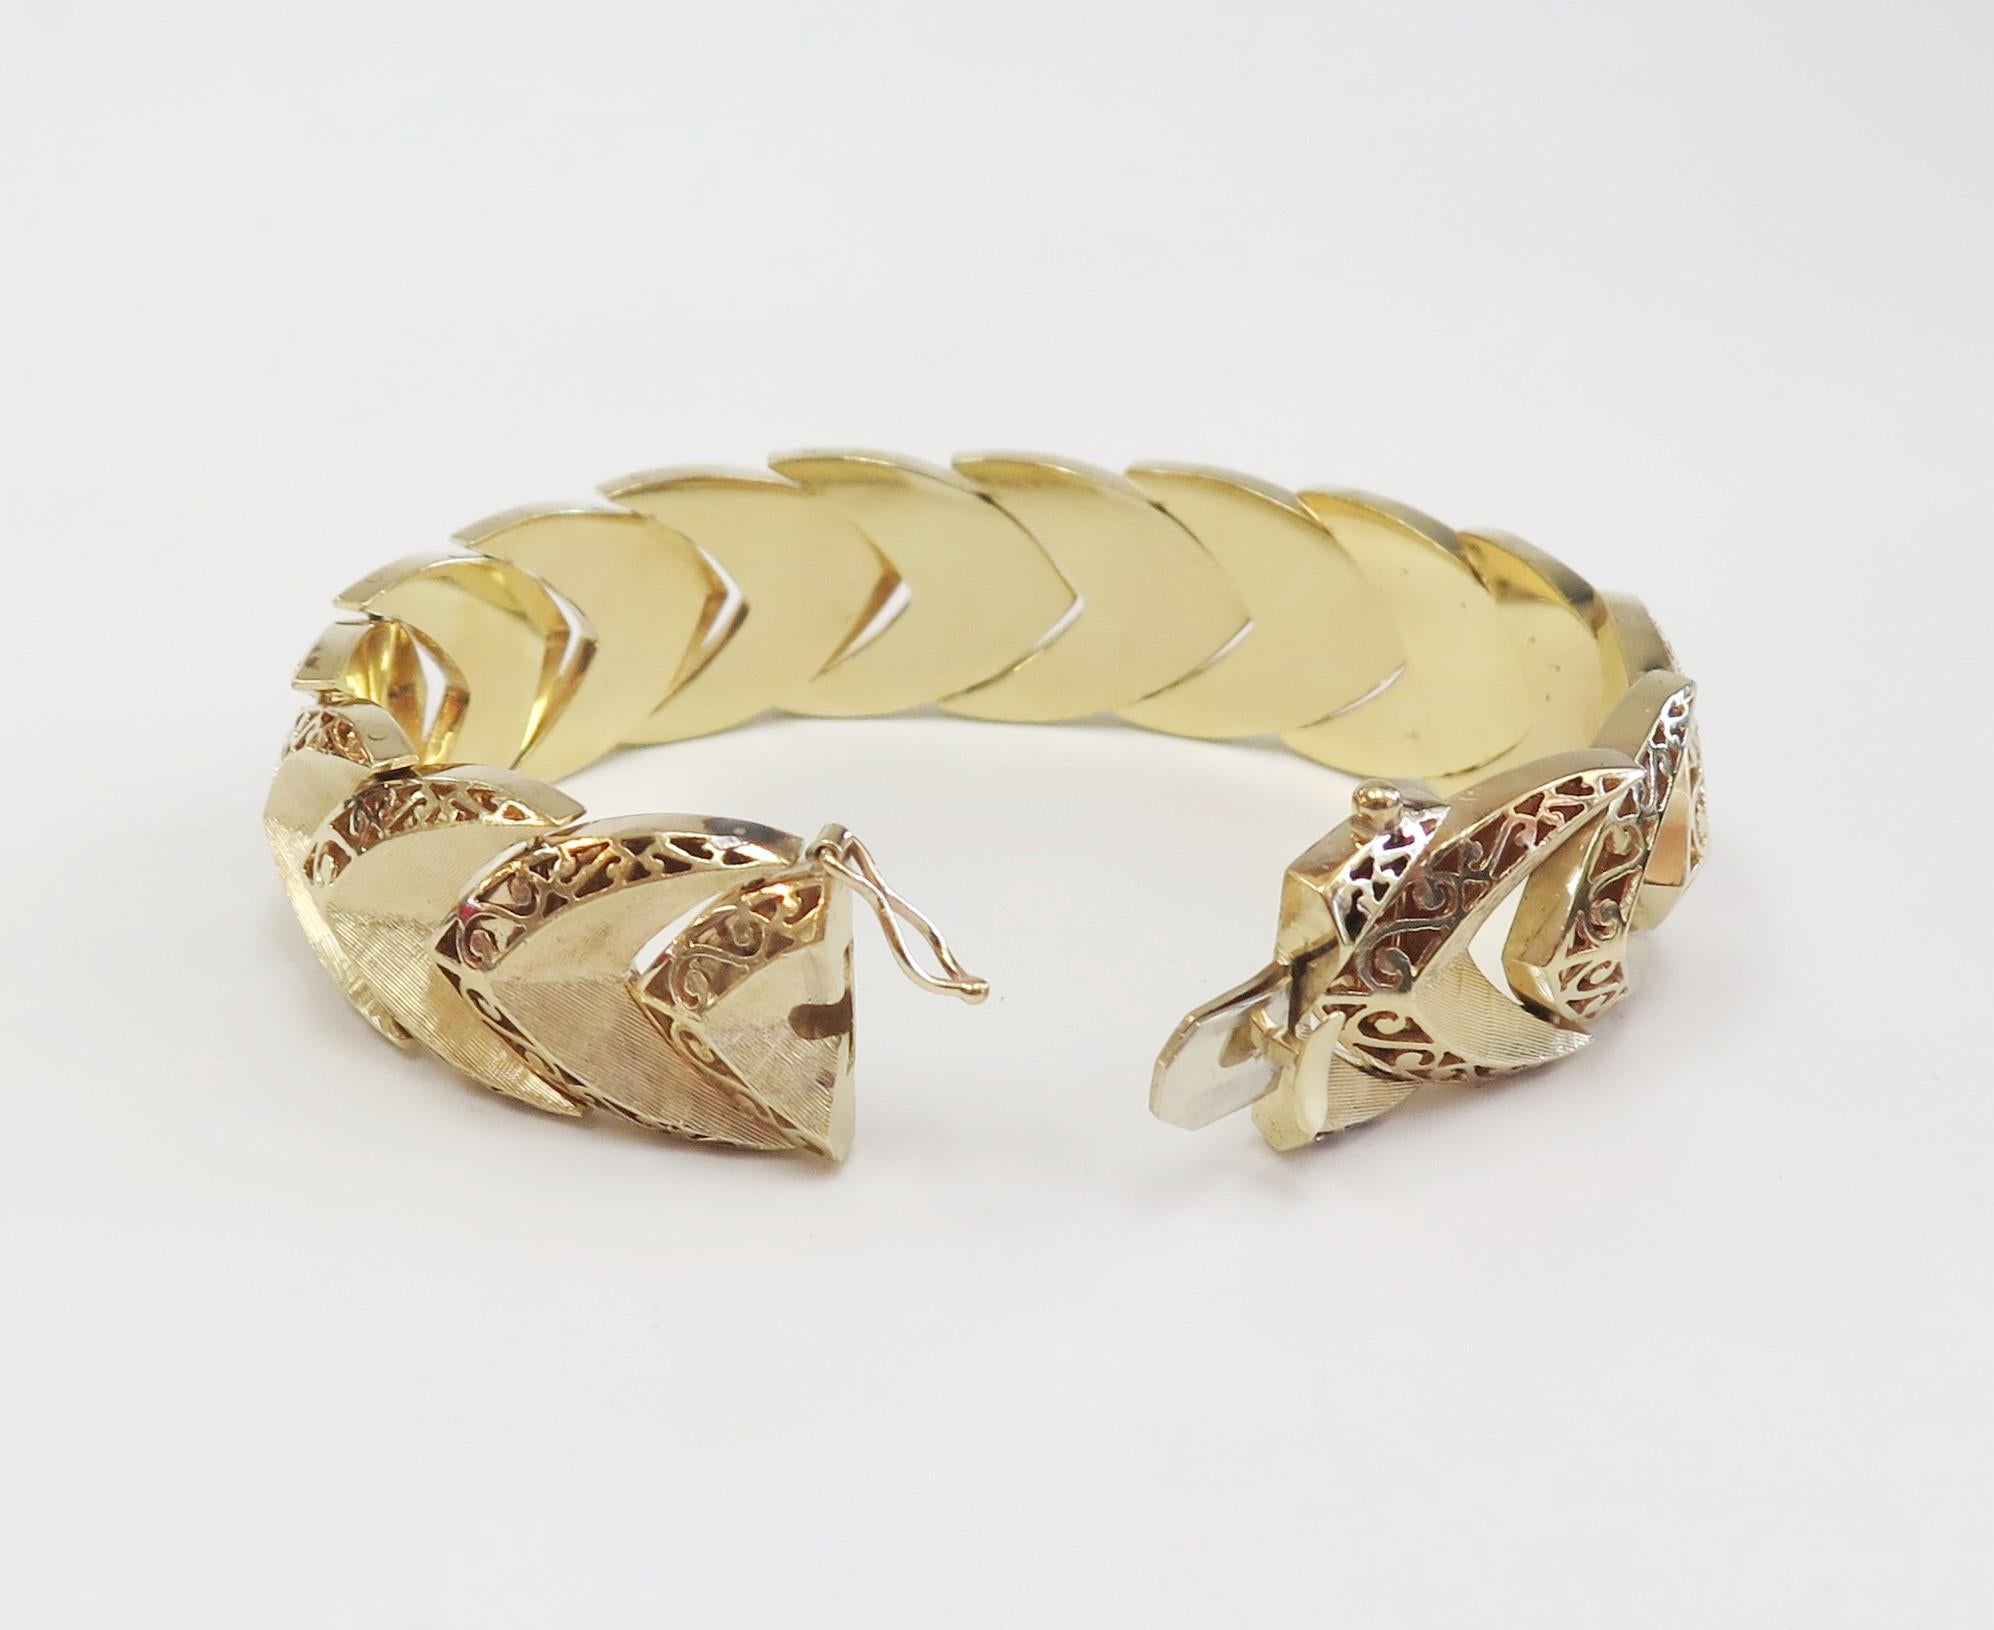 This beautiful 14 karat yellow gold bracelet has a florentine finish chevron shape, and a shiny polished scroll work design on each link. 
Width: 3/4